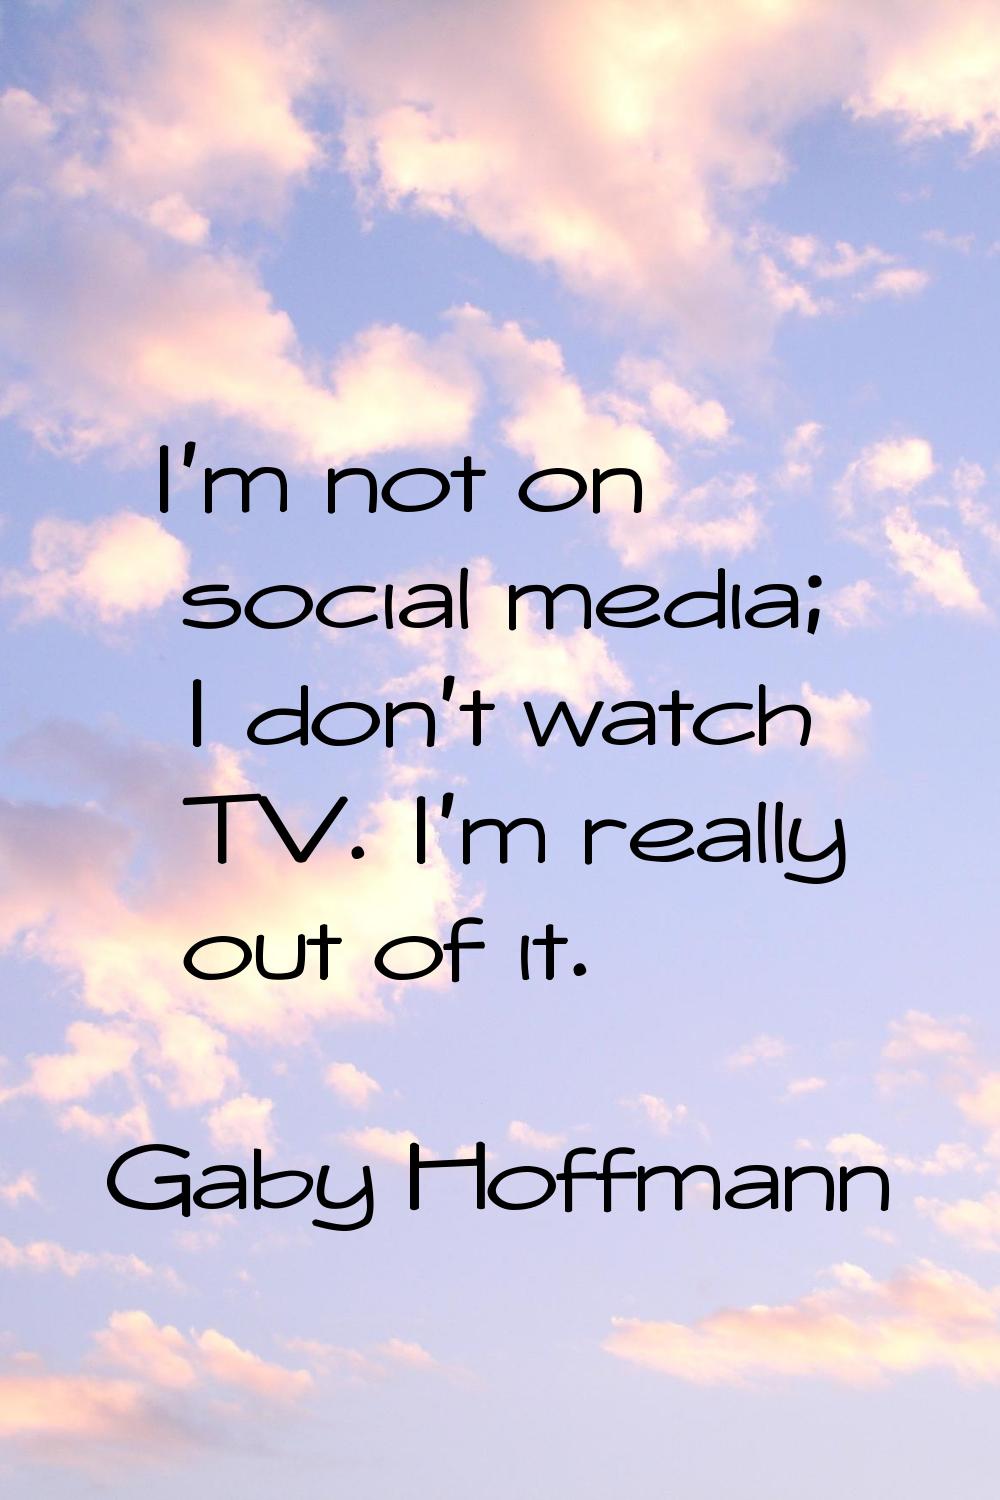 I'm not on social media; I don't watch TV. I'm really out of it.